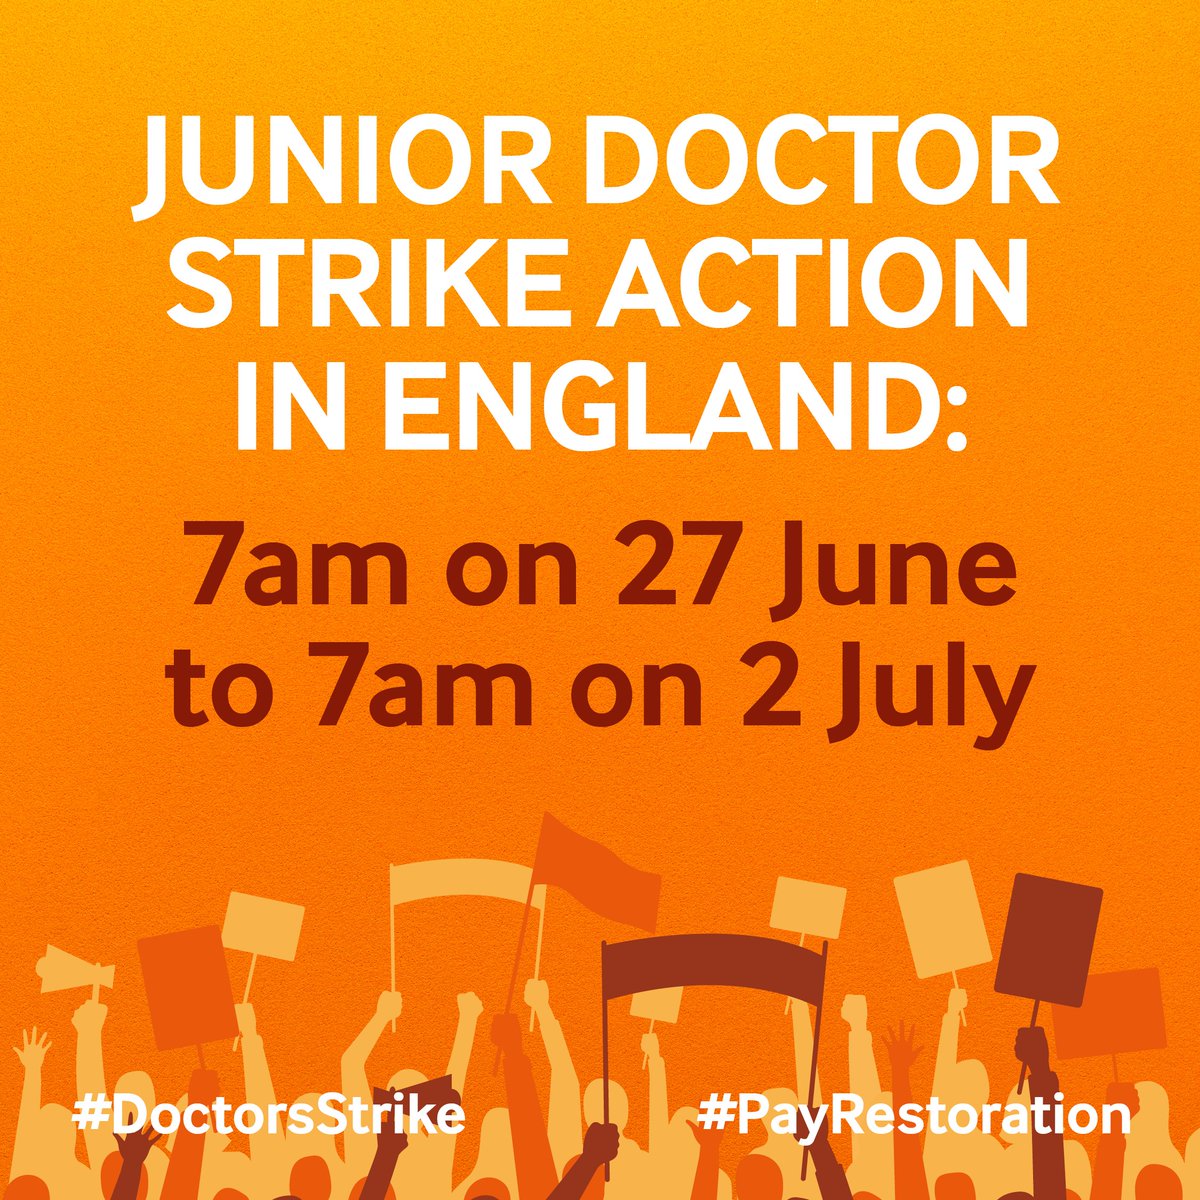 Junior doctors, let's make sure full pay restoration stays front and centre during this election. We strike again with a 5 day full walkout from 7am on 27 June to 7am on 2 July. Let's make this round of action our biggest and loudest yet! #DoctorsStrike bma.org.uk/bma-media-cent…